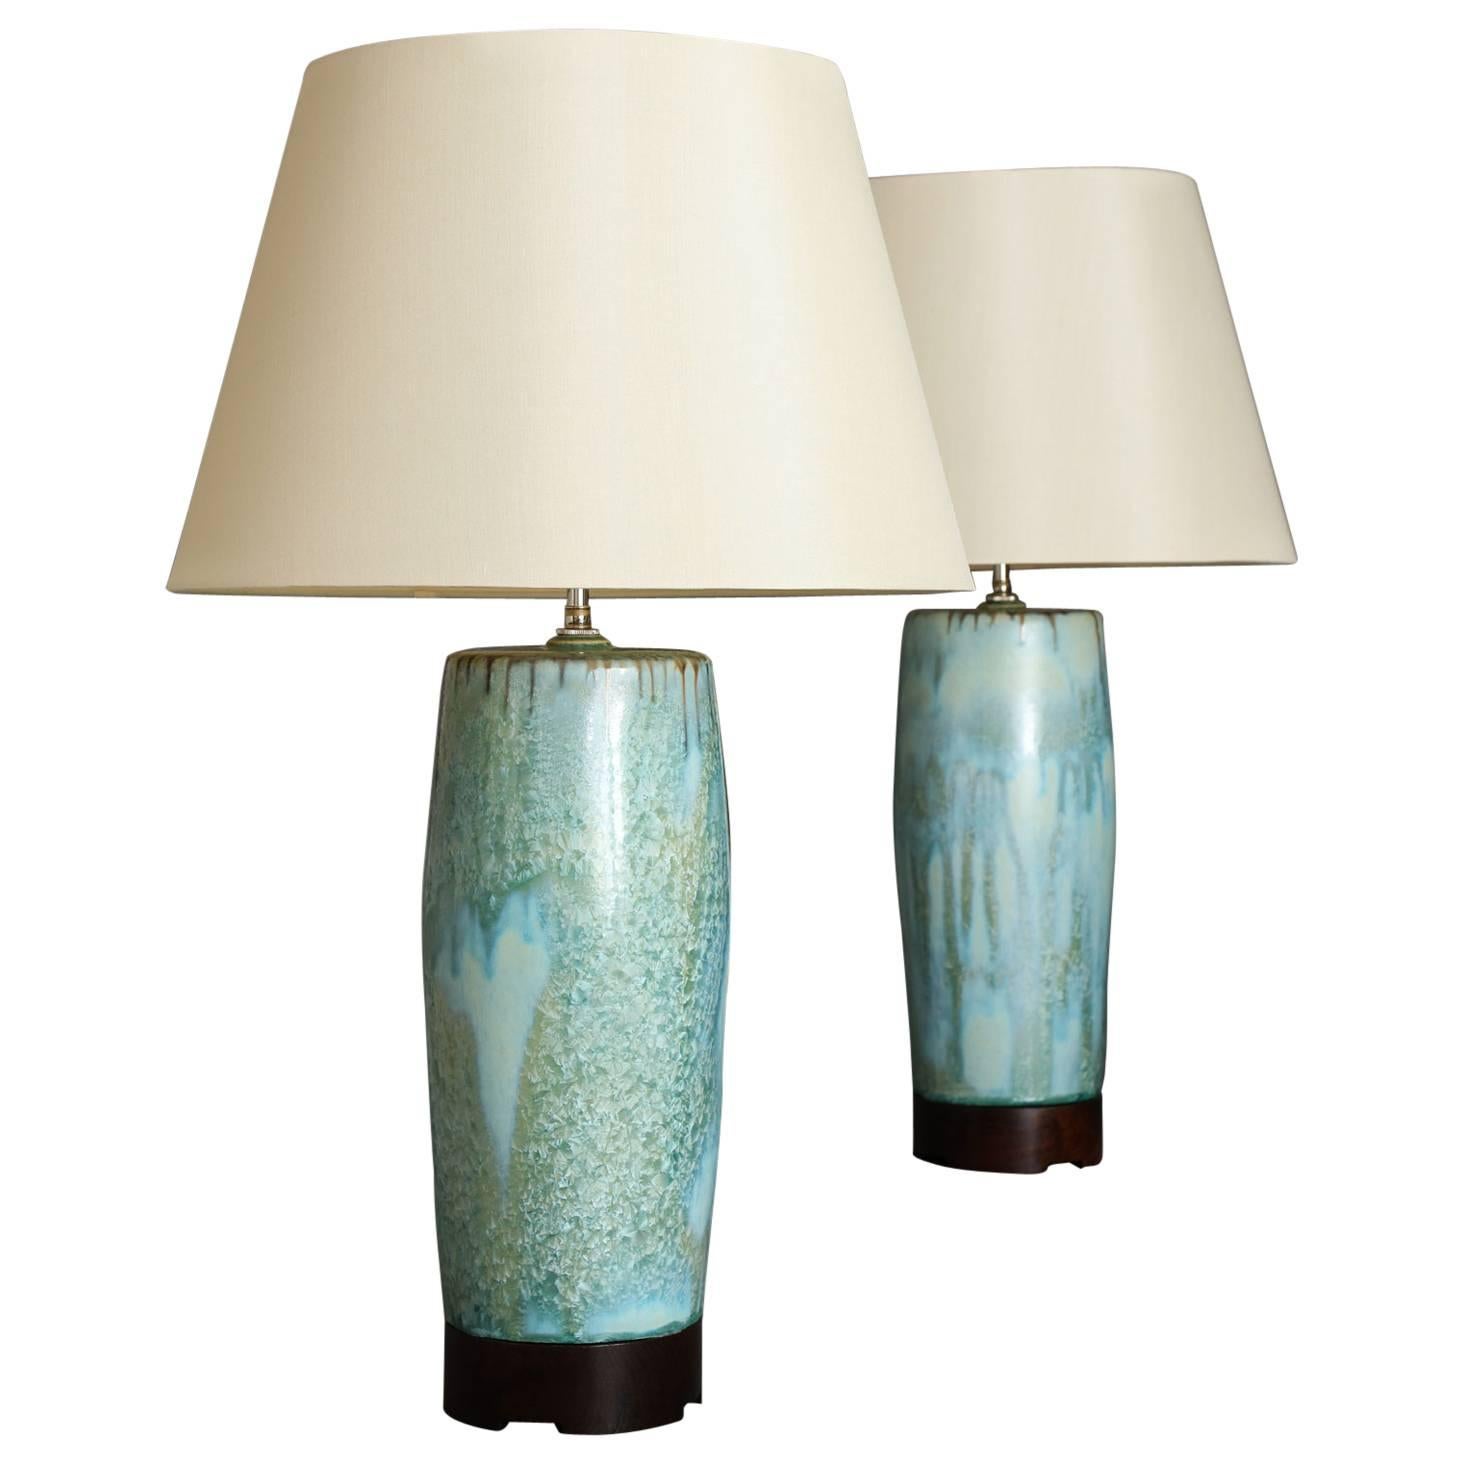 Large Pale Blue Ceramic Lamps by SCDS